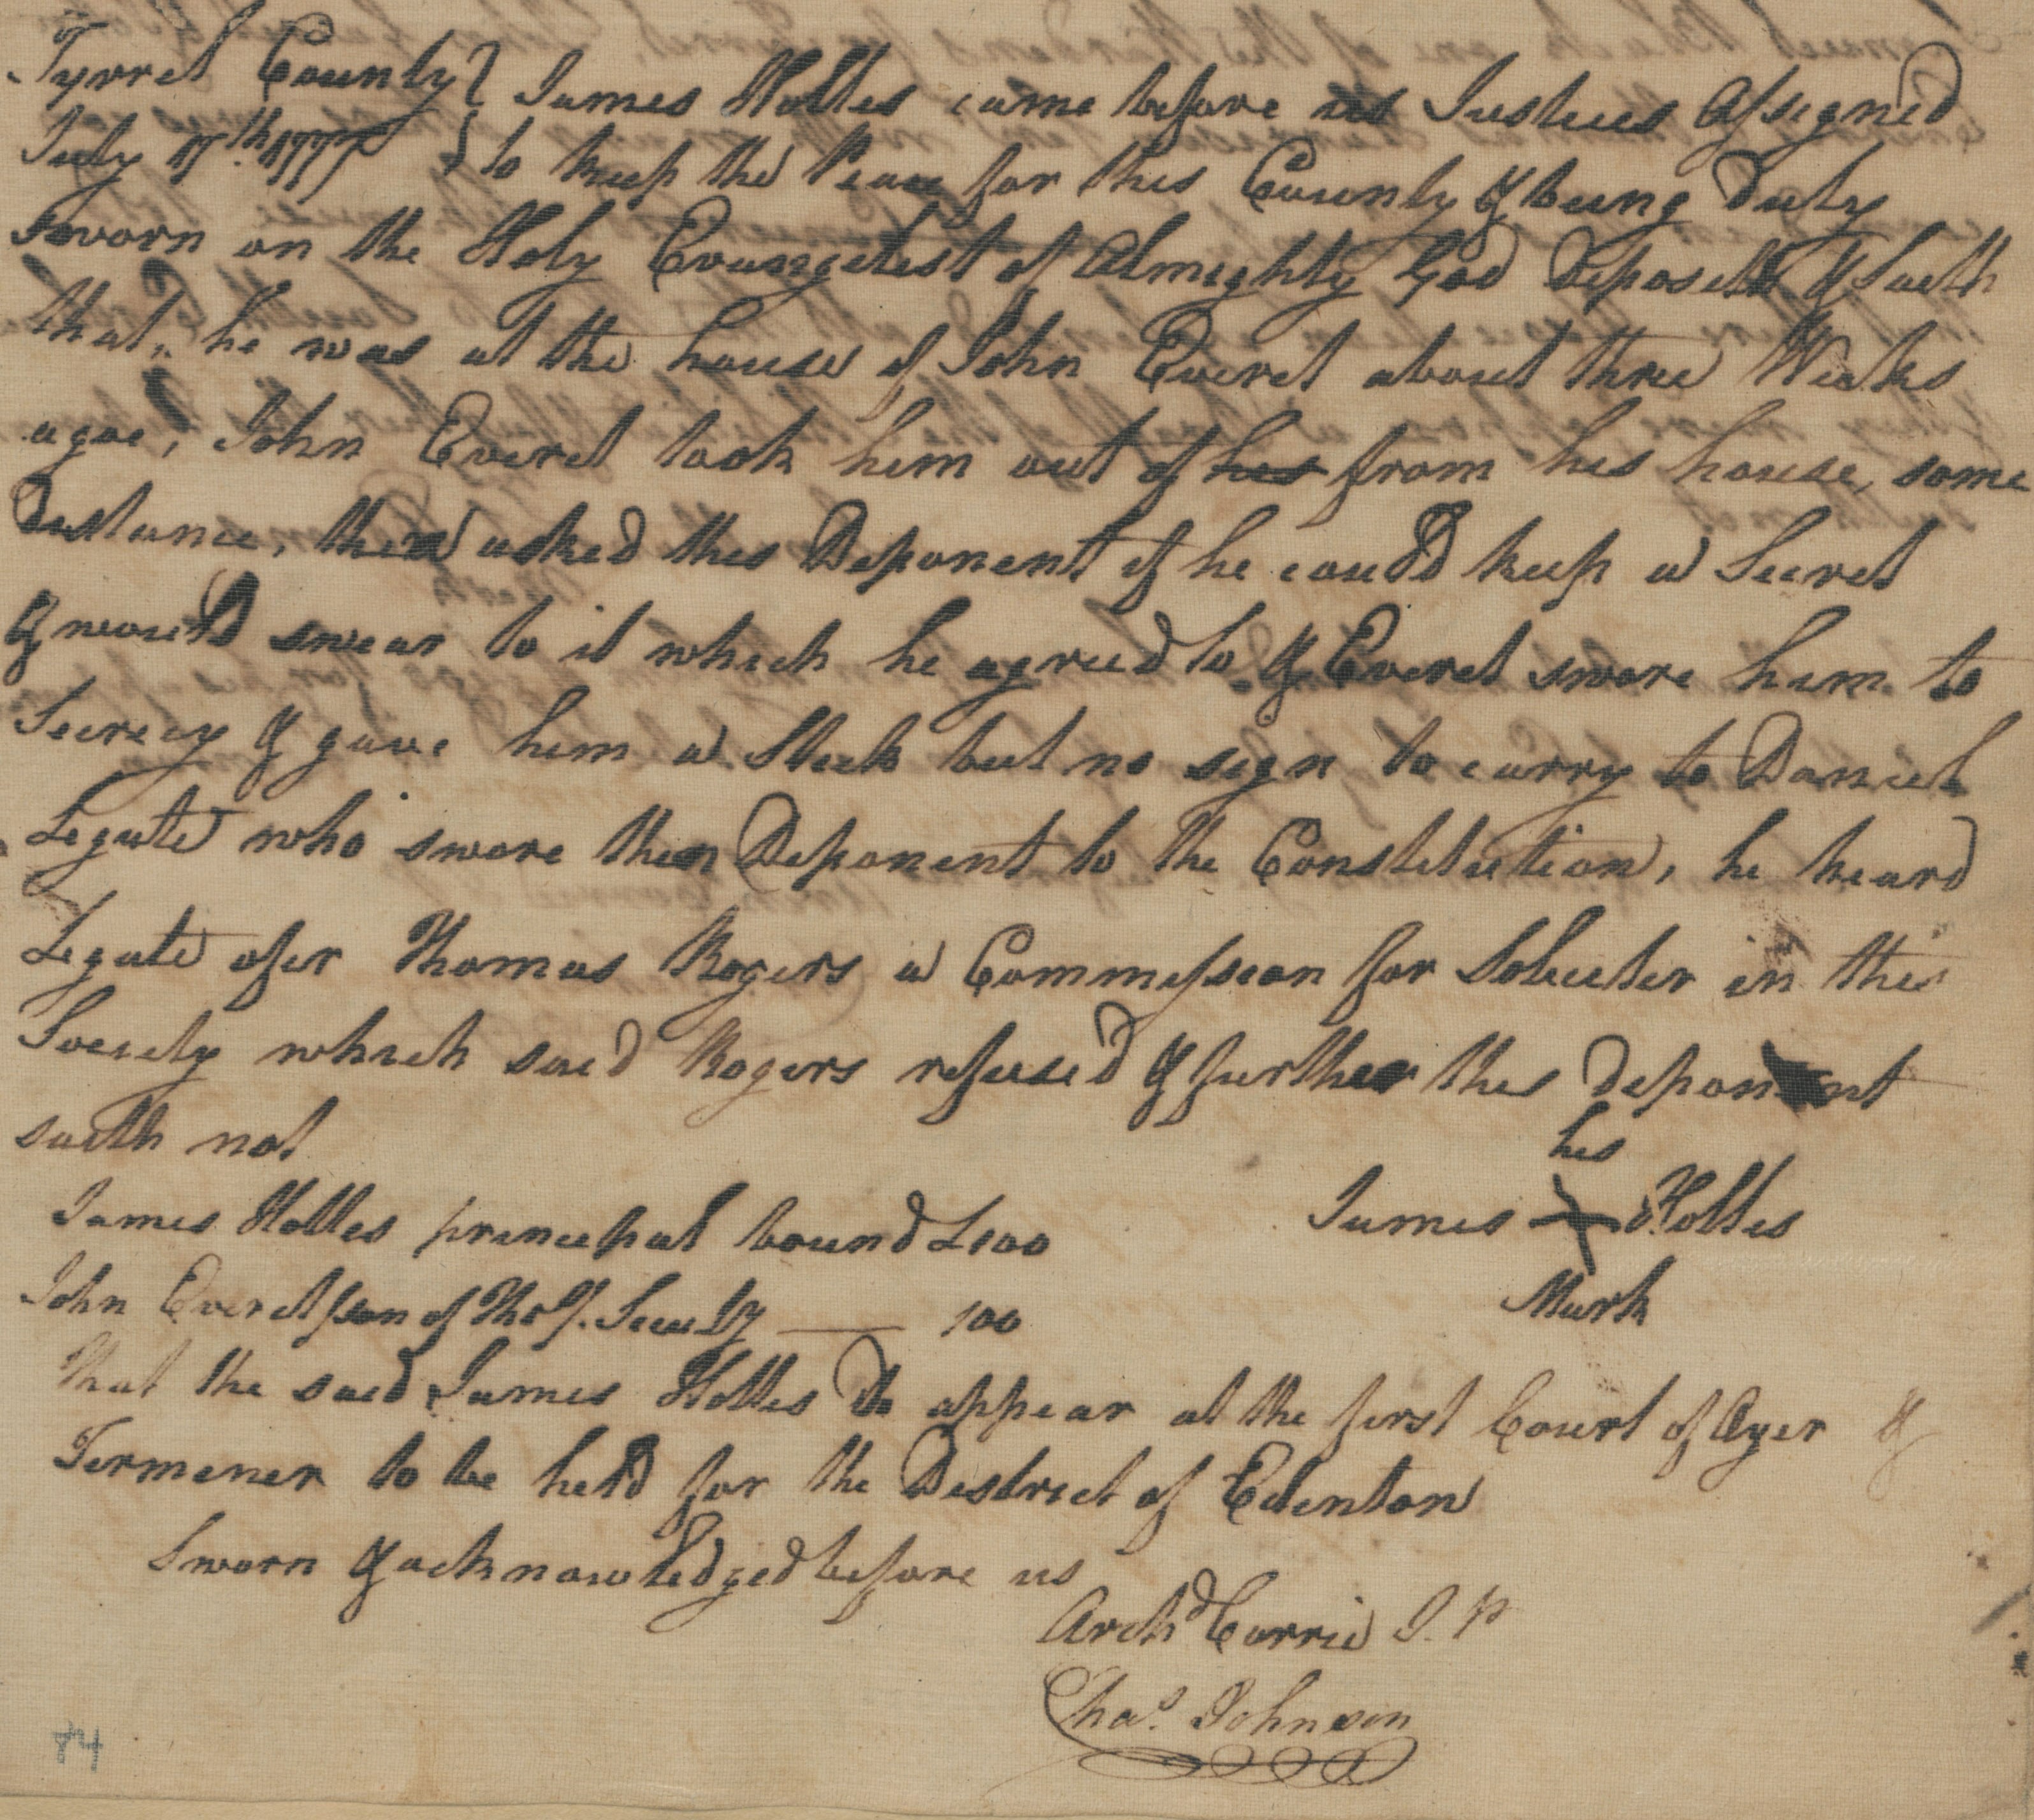 Deposition of James Holles, 17 July 1777, page 1